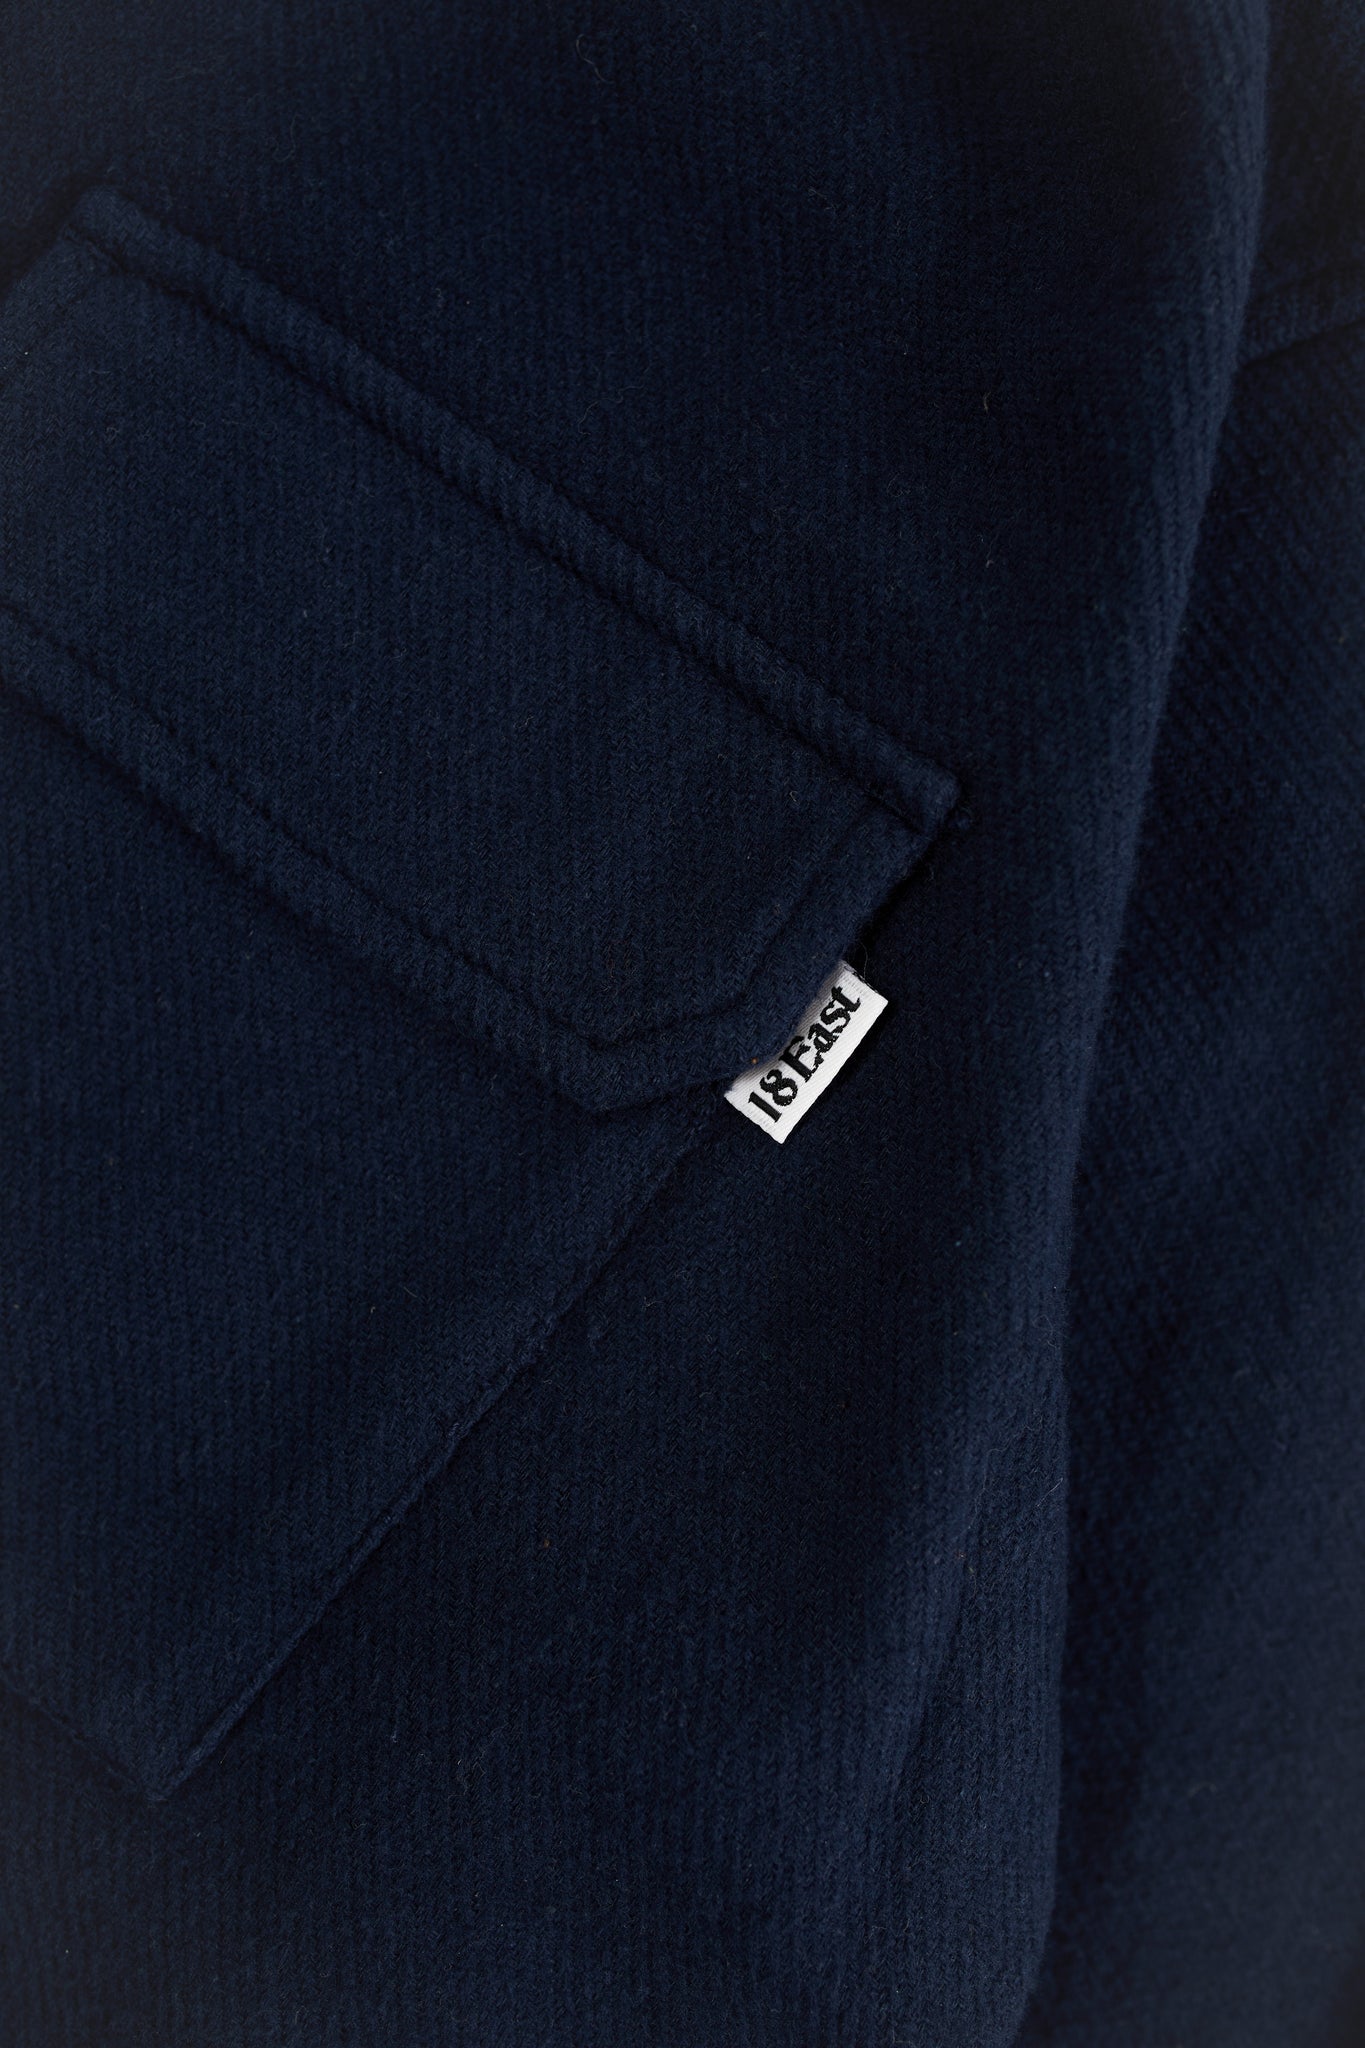 FIELD SHIRT - OMBRE BLUE BRUSHED COTTON TWILL